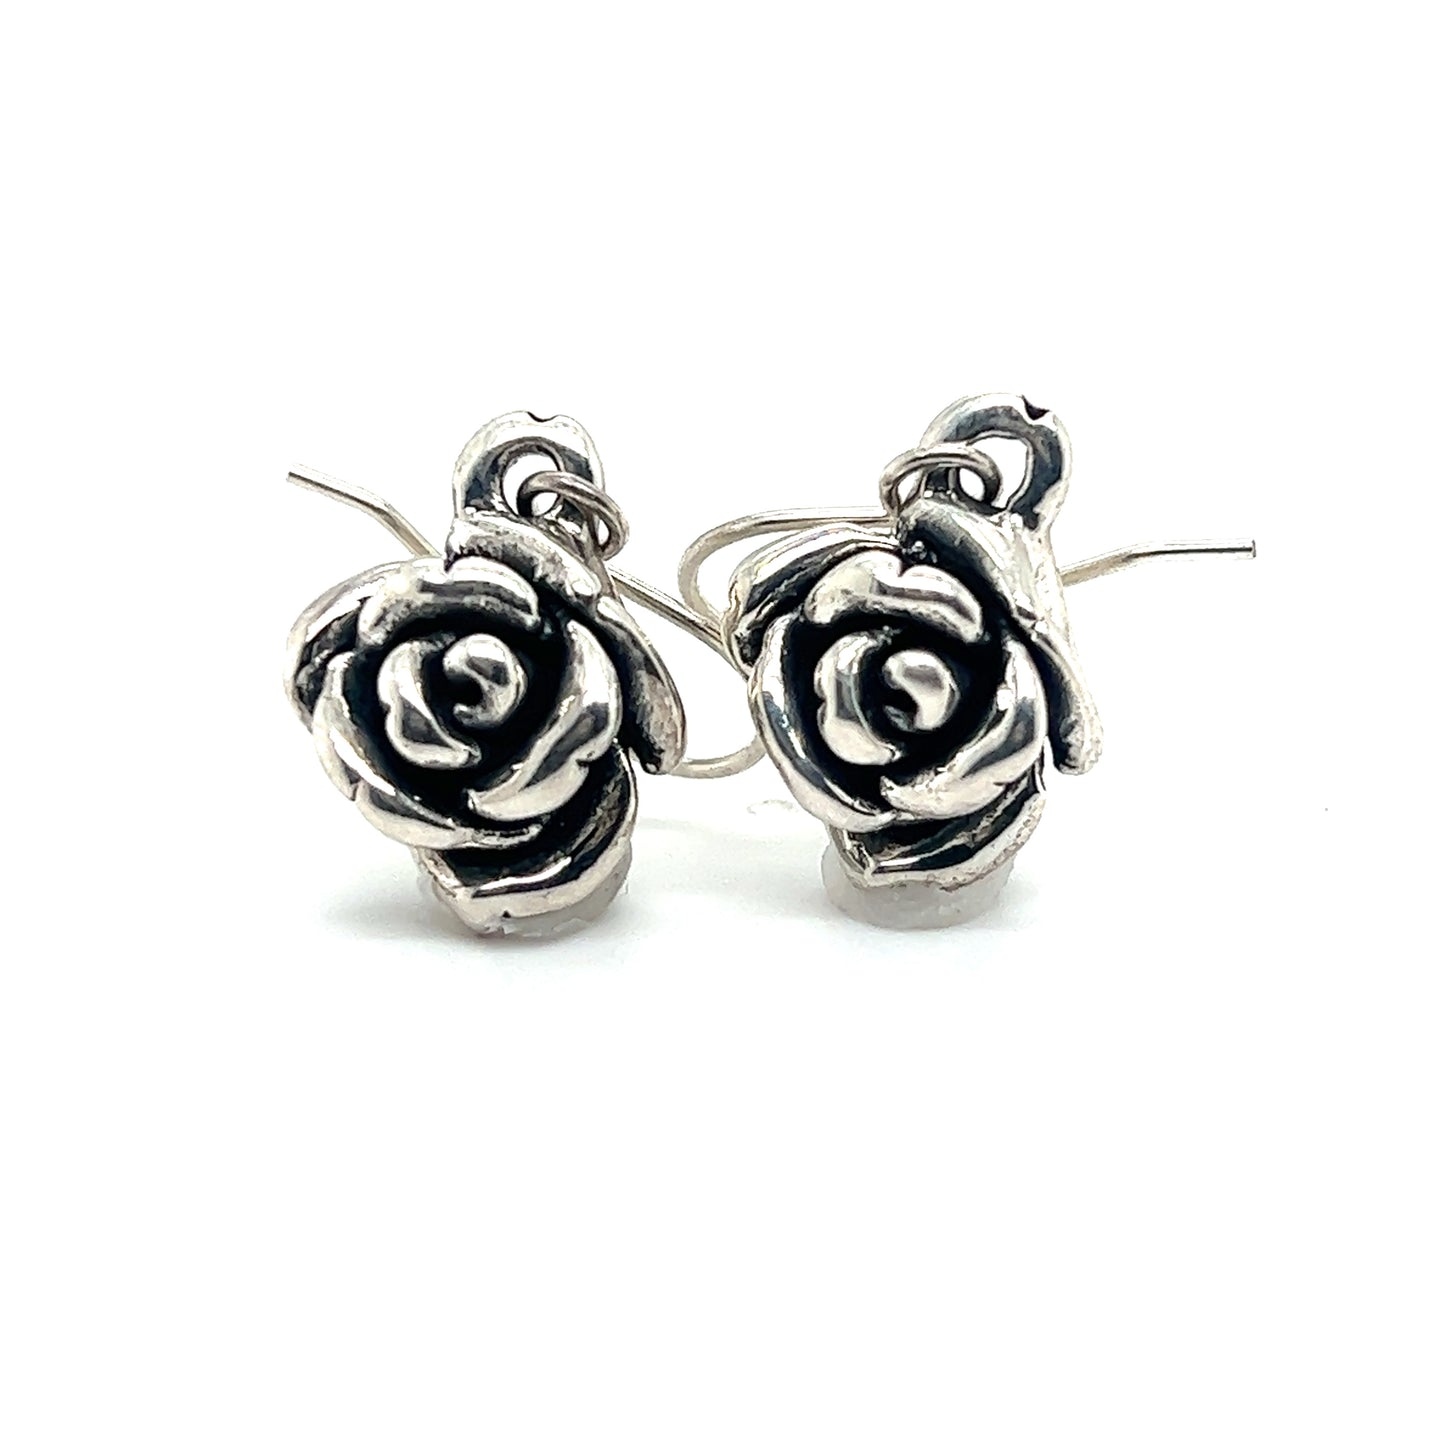 
                  
                    These Super Silver Small Electroformed Rose Earrings showcase exquisite craftsmanship and come in a stunning electroformed design. The earrings are beautifully displayed on a pristine white background, accentuating their durability and charm.
                  
                